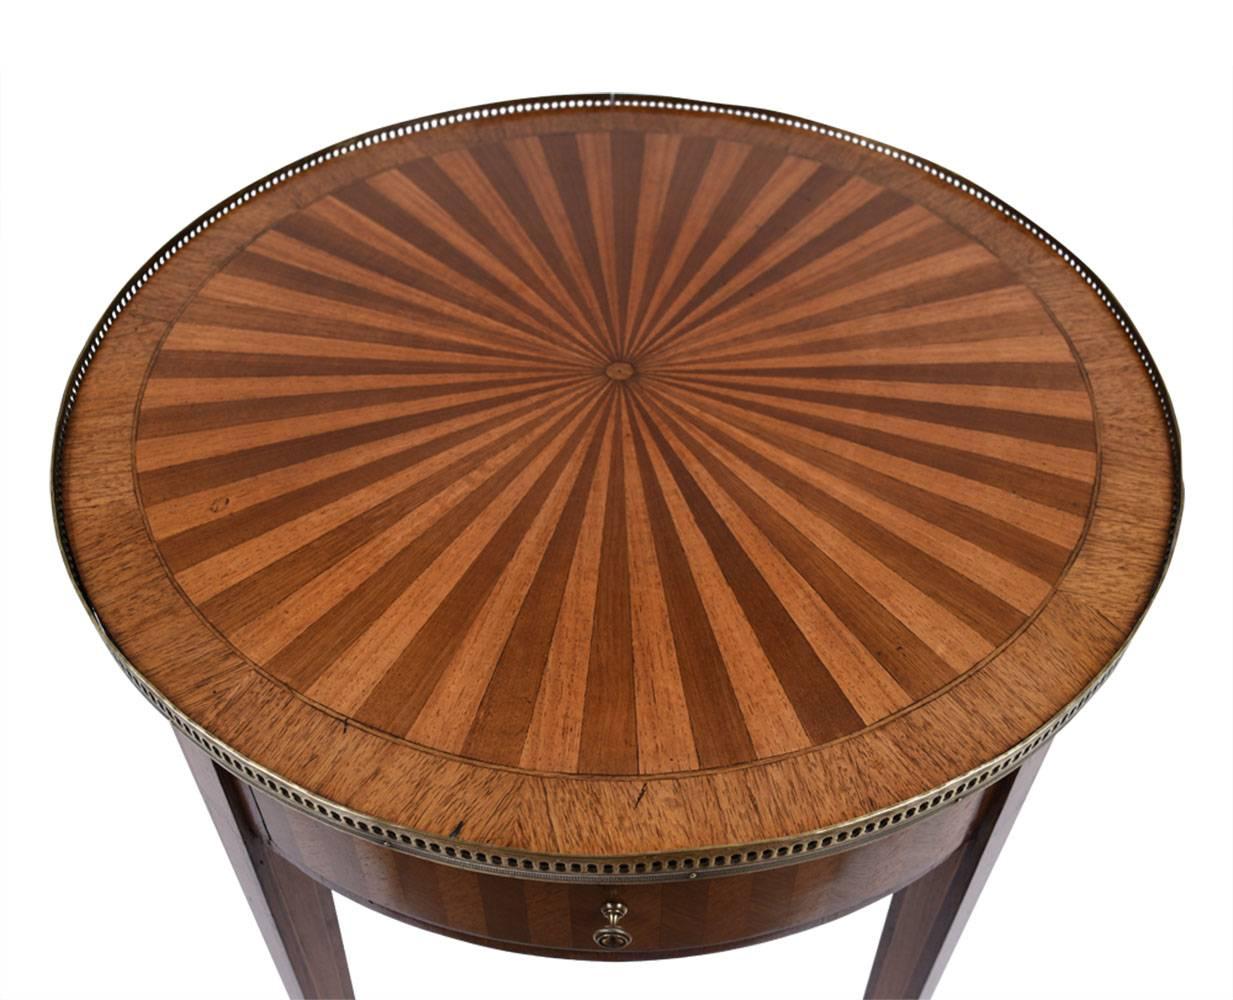 This 1900s Antique French Louis XVI-style parlor table is made of walnut wood finished in a walnut color stain. The side tables are adorned with inlaid designs. On the top the inlaid details are in a sunburst pattern that is accentuated by the brass